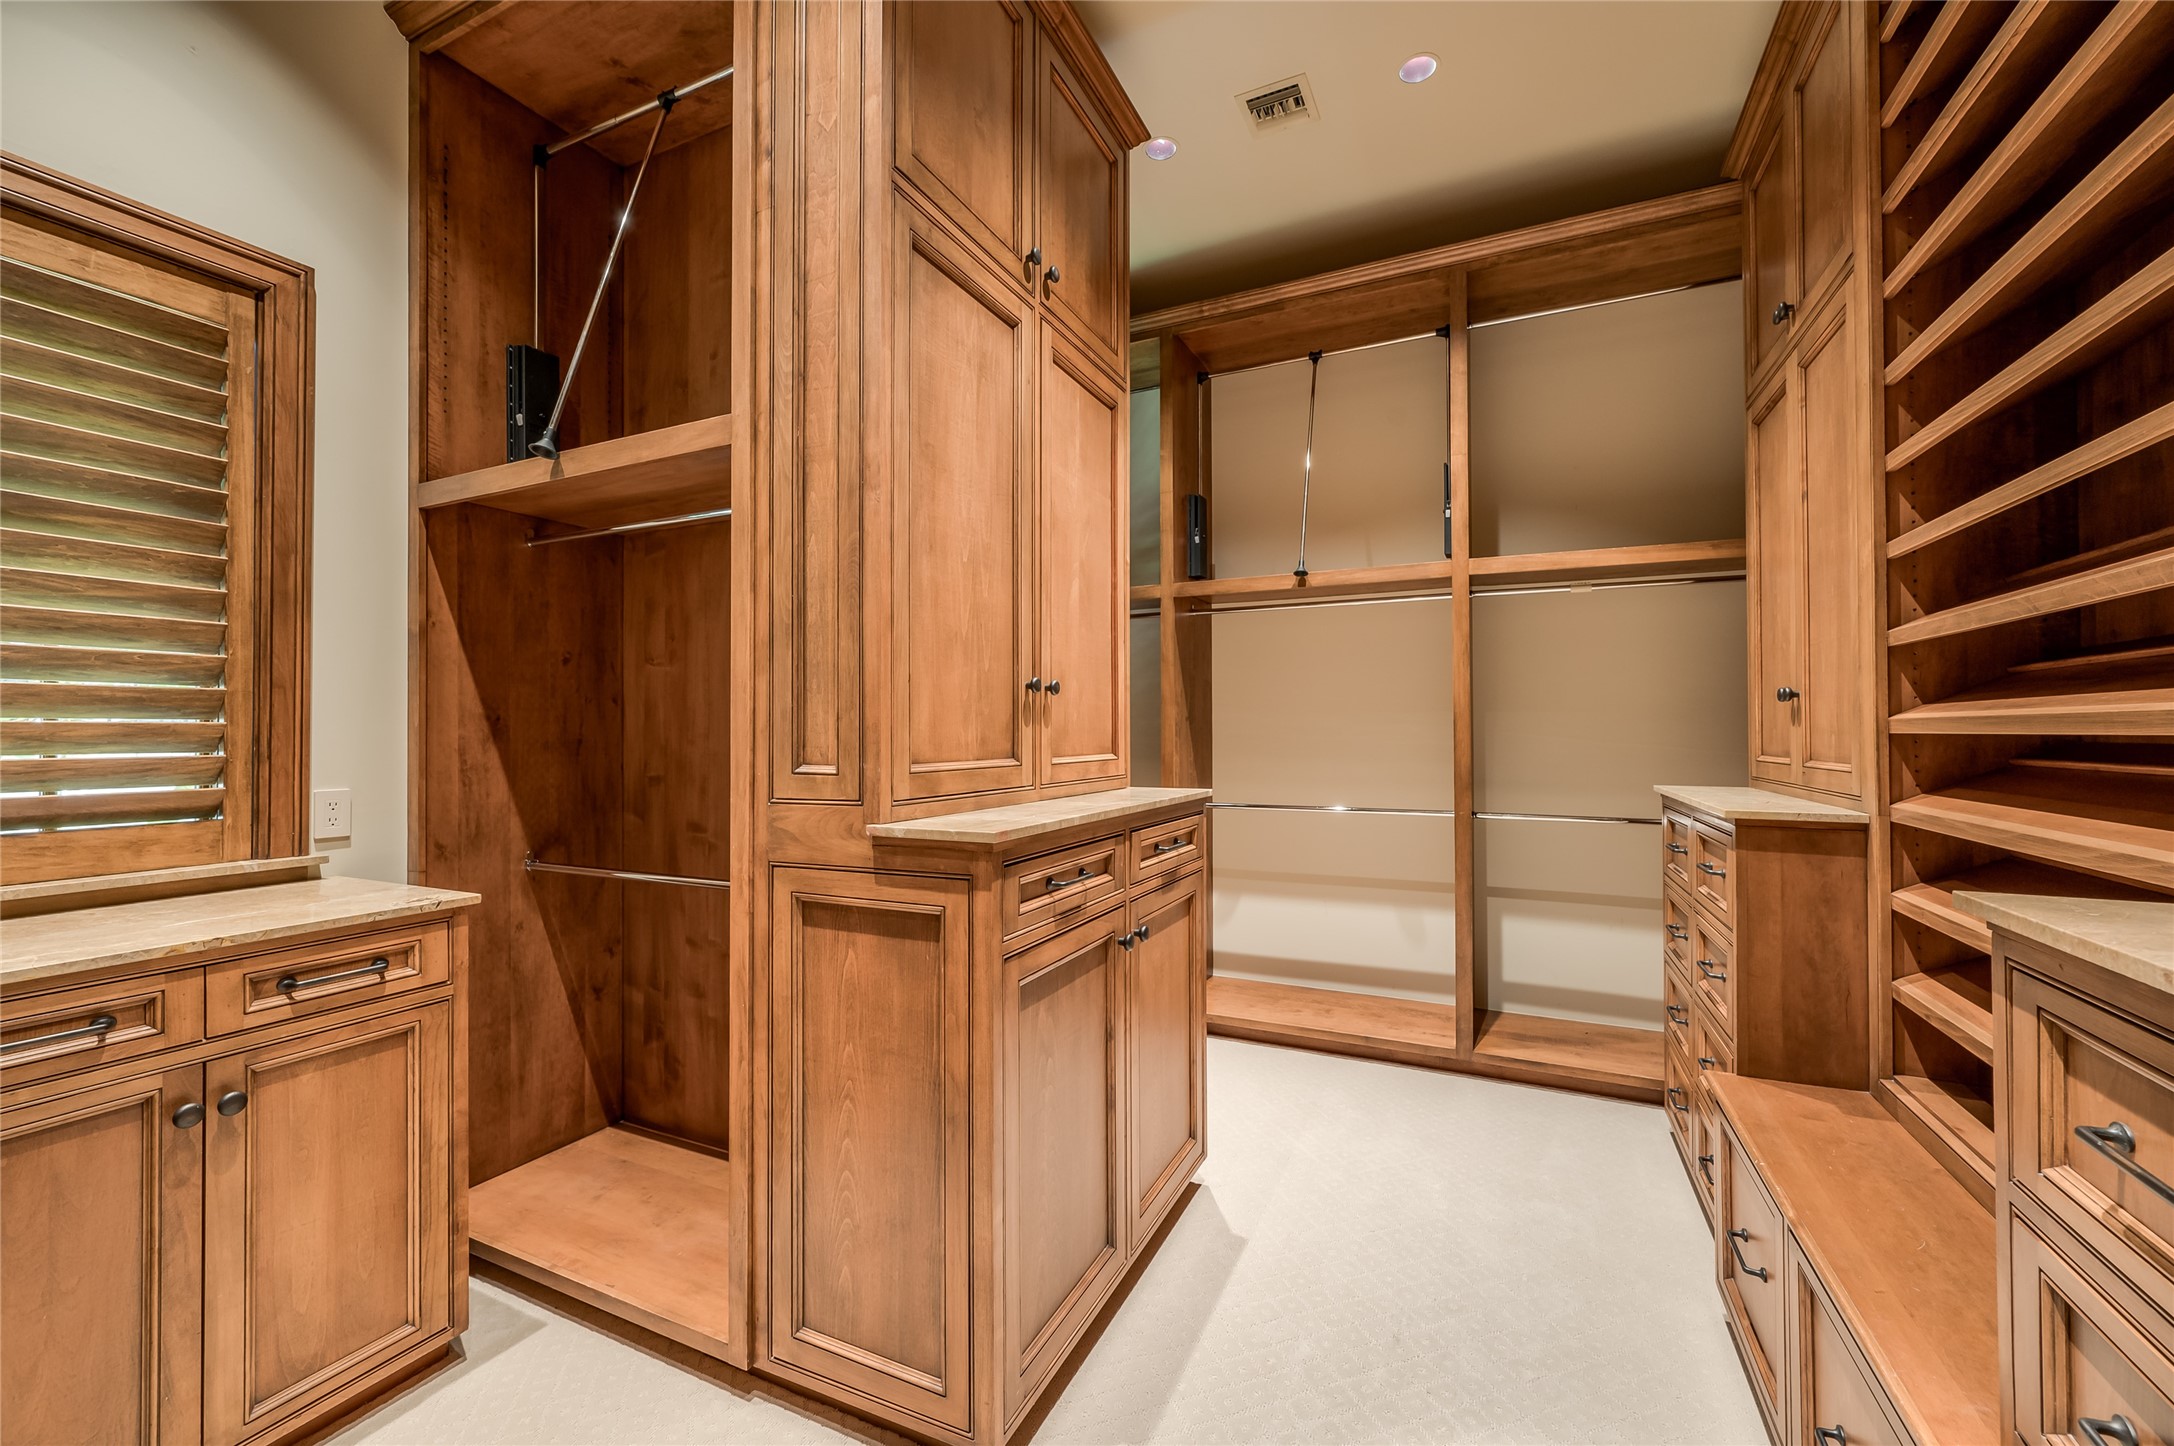 [One of Two Primary Baths]
The previously shown bedroom 's bath is the largest on the second floor. Note large walk-in closet at rear.